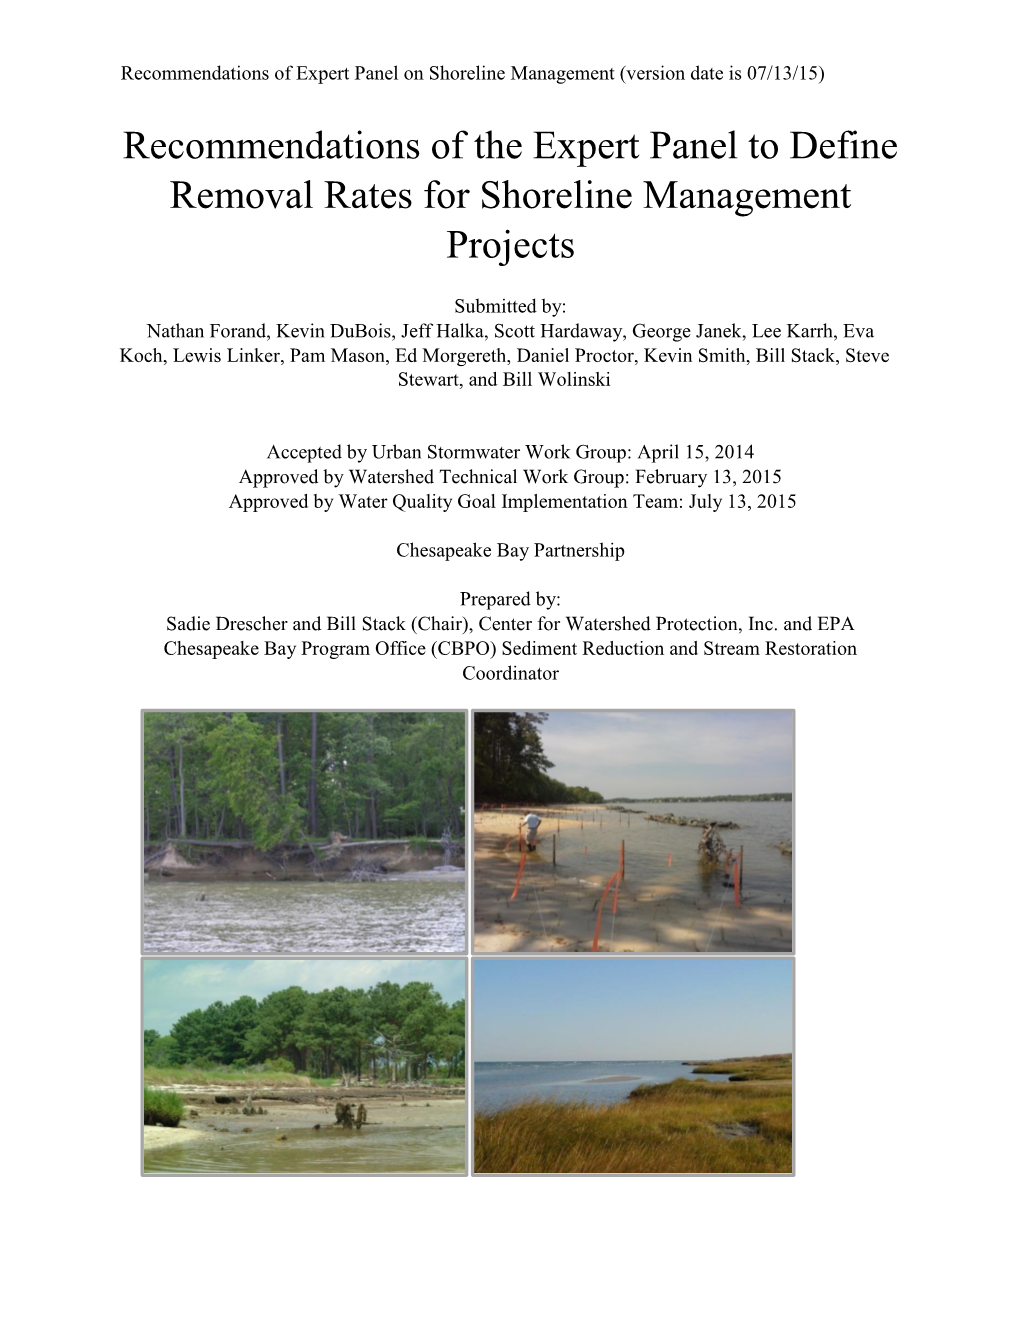 Recommendations of the Expert Panel to Define Removal Rates for Individual Stream Restoration Projects: Final Draft (April 2013)